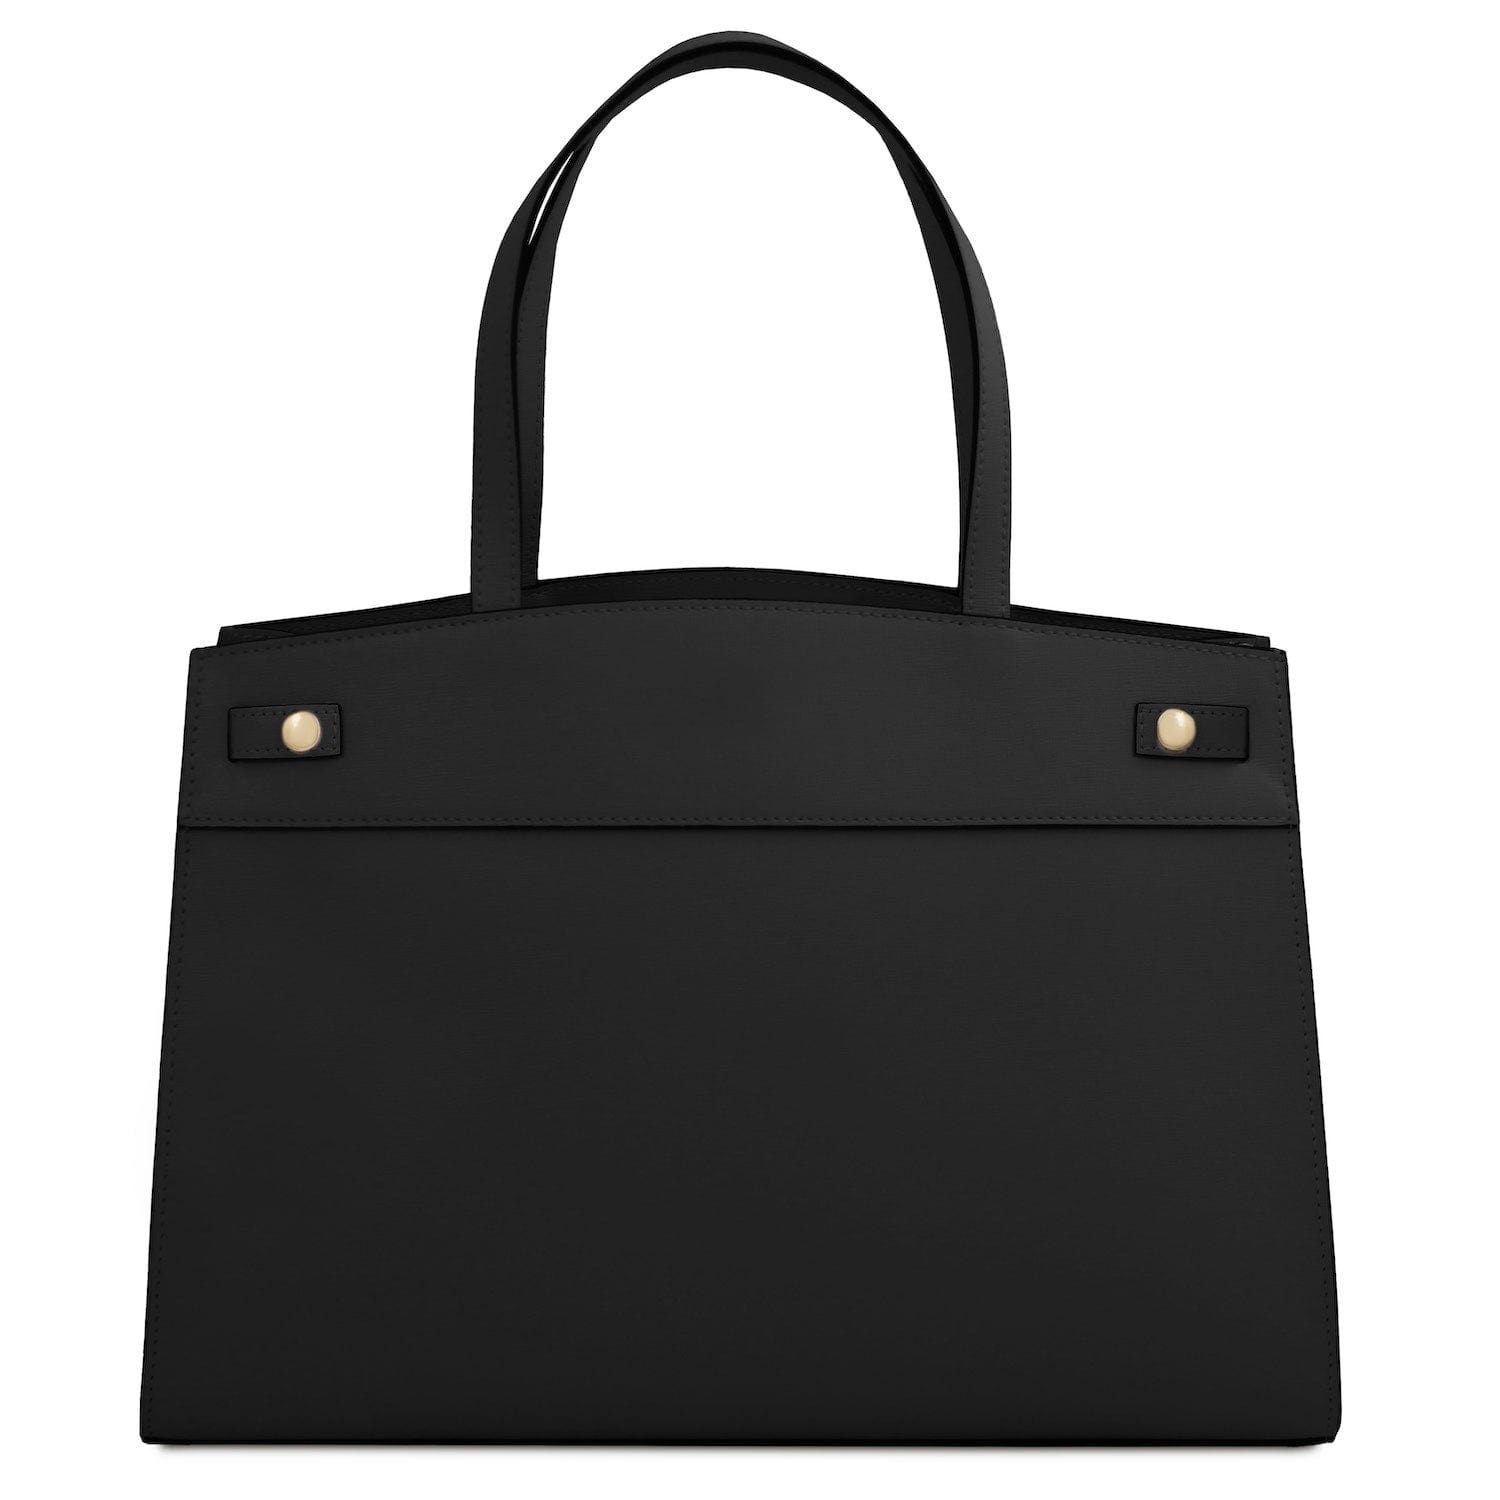 Musa - Leather tote | TL142382 - Premium Leather shoulder bags - Shop now at San Rocco Italia